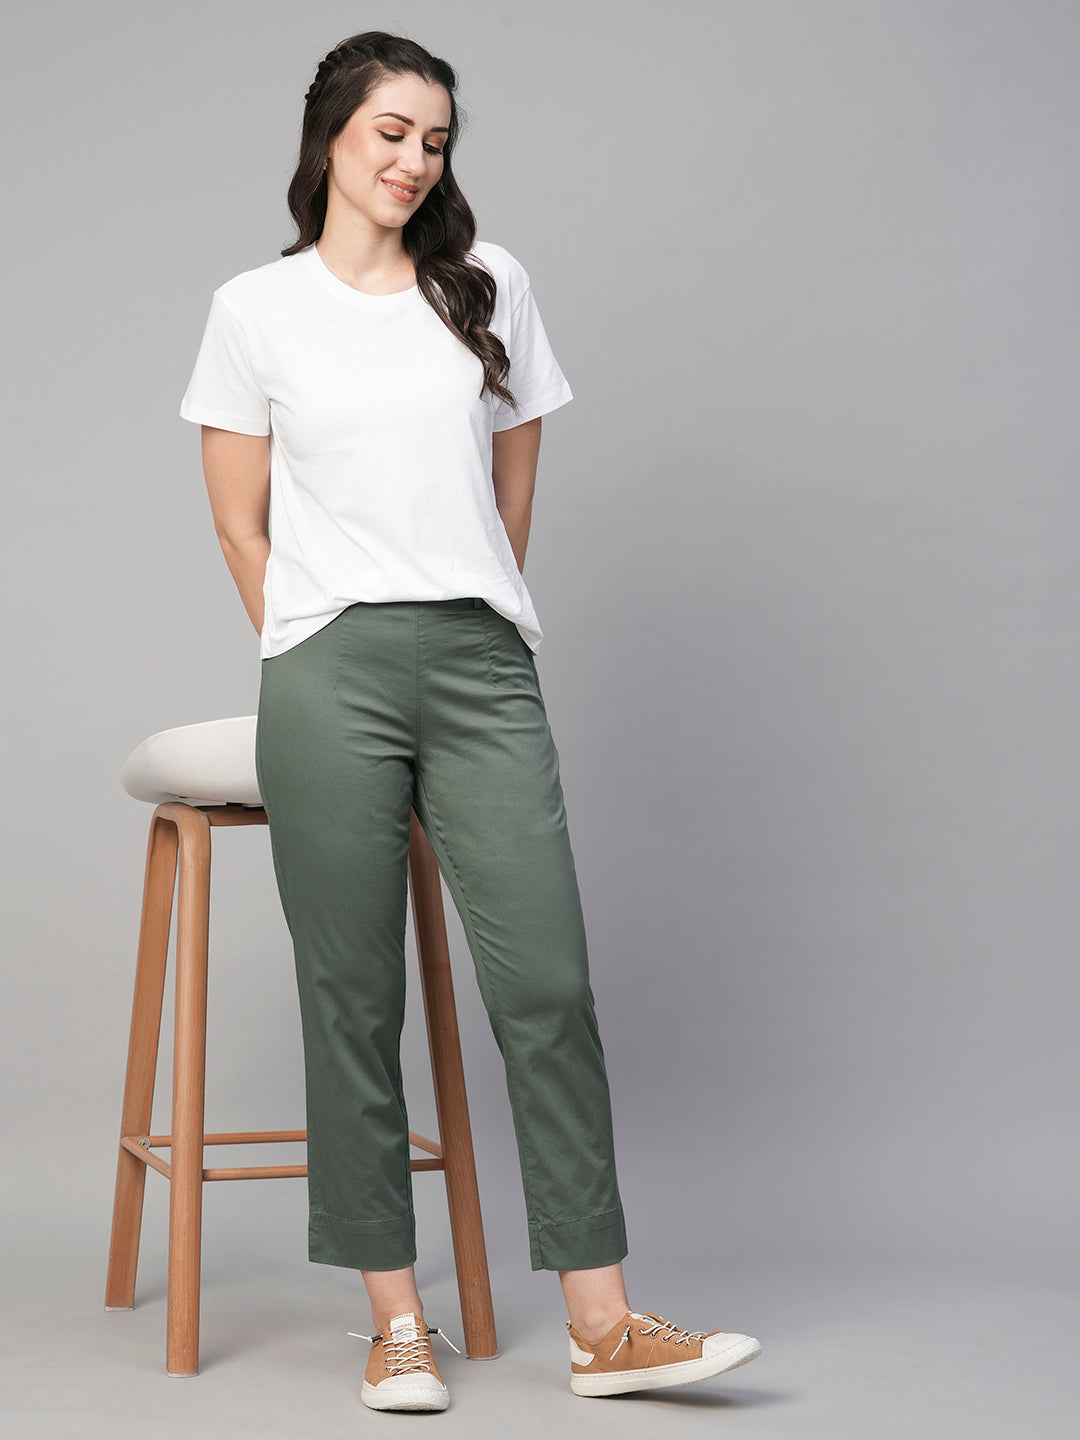 Cotton Pleated Pants Women Trouser at best price in Samastipur